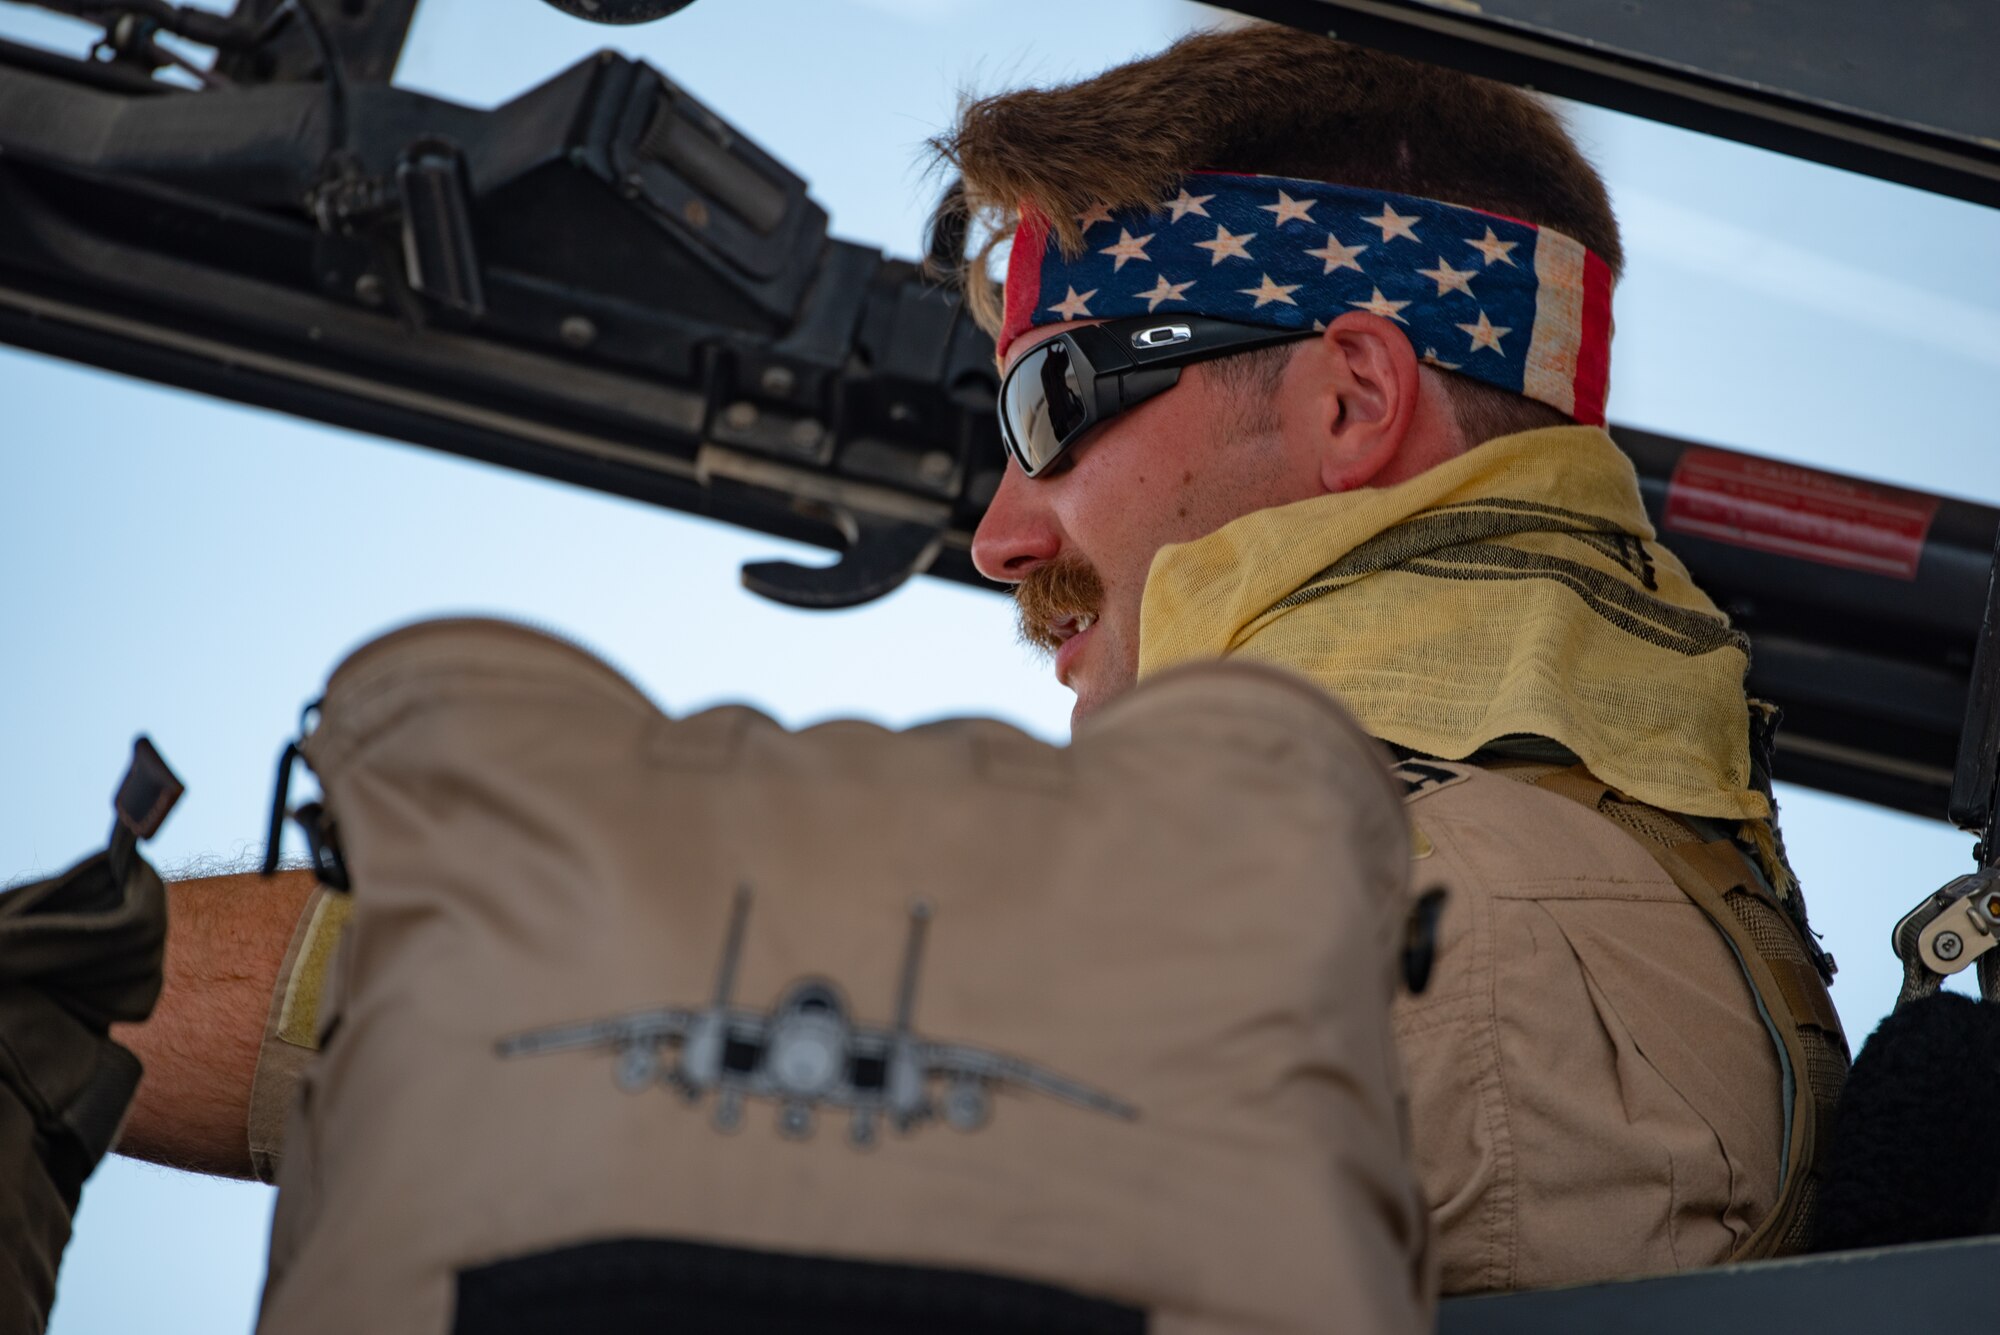 Capt. “Nuke” Messmore, 336th Expeditionary Fighter Squadron combat weapons system officer, prepares for flight for Agile Strike Sept. 18, 2019, at Al Dhafra Air Base, United Arab Emirates. The 336th EFS sent two aircraft and personnel to operate missions out of Prince Sultan Air Base, Saudi Arabia to challenge their flexibility at expanding tactical and strategic reach while strengthening coalition and regional partnerships in the Air Forces Central Command area of responsibility through adaptive basing. (U.S. Air Force photo by Staff Sgt. Chris Thornbury)